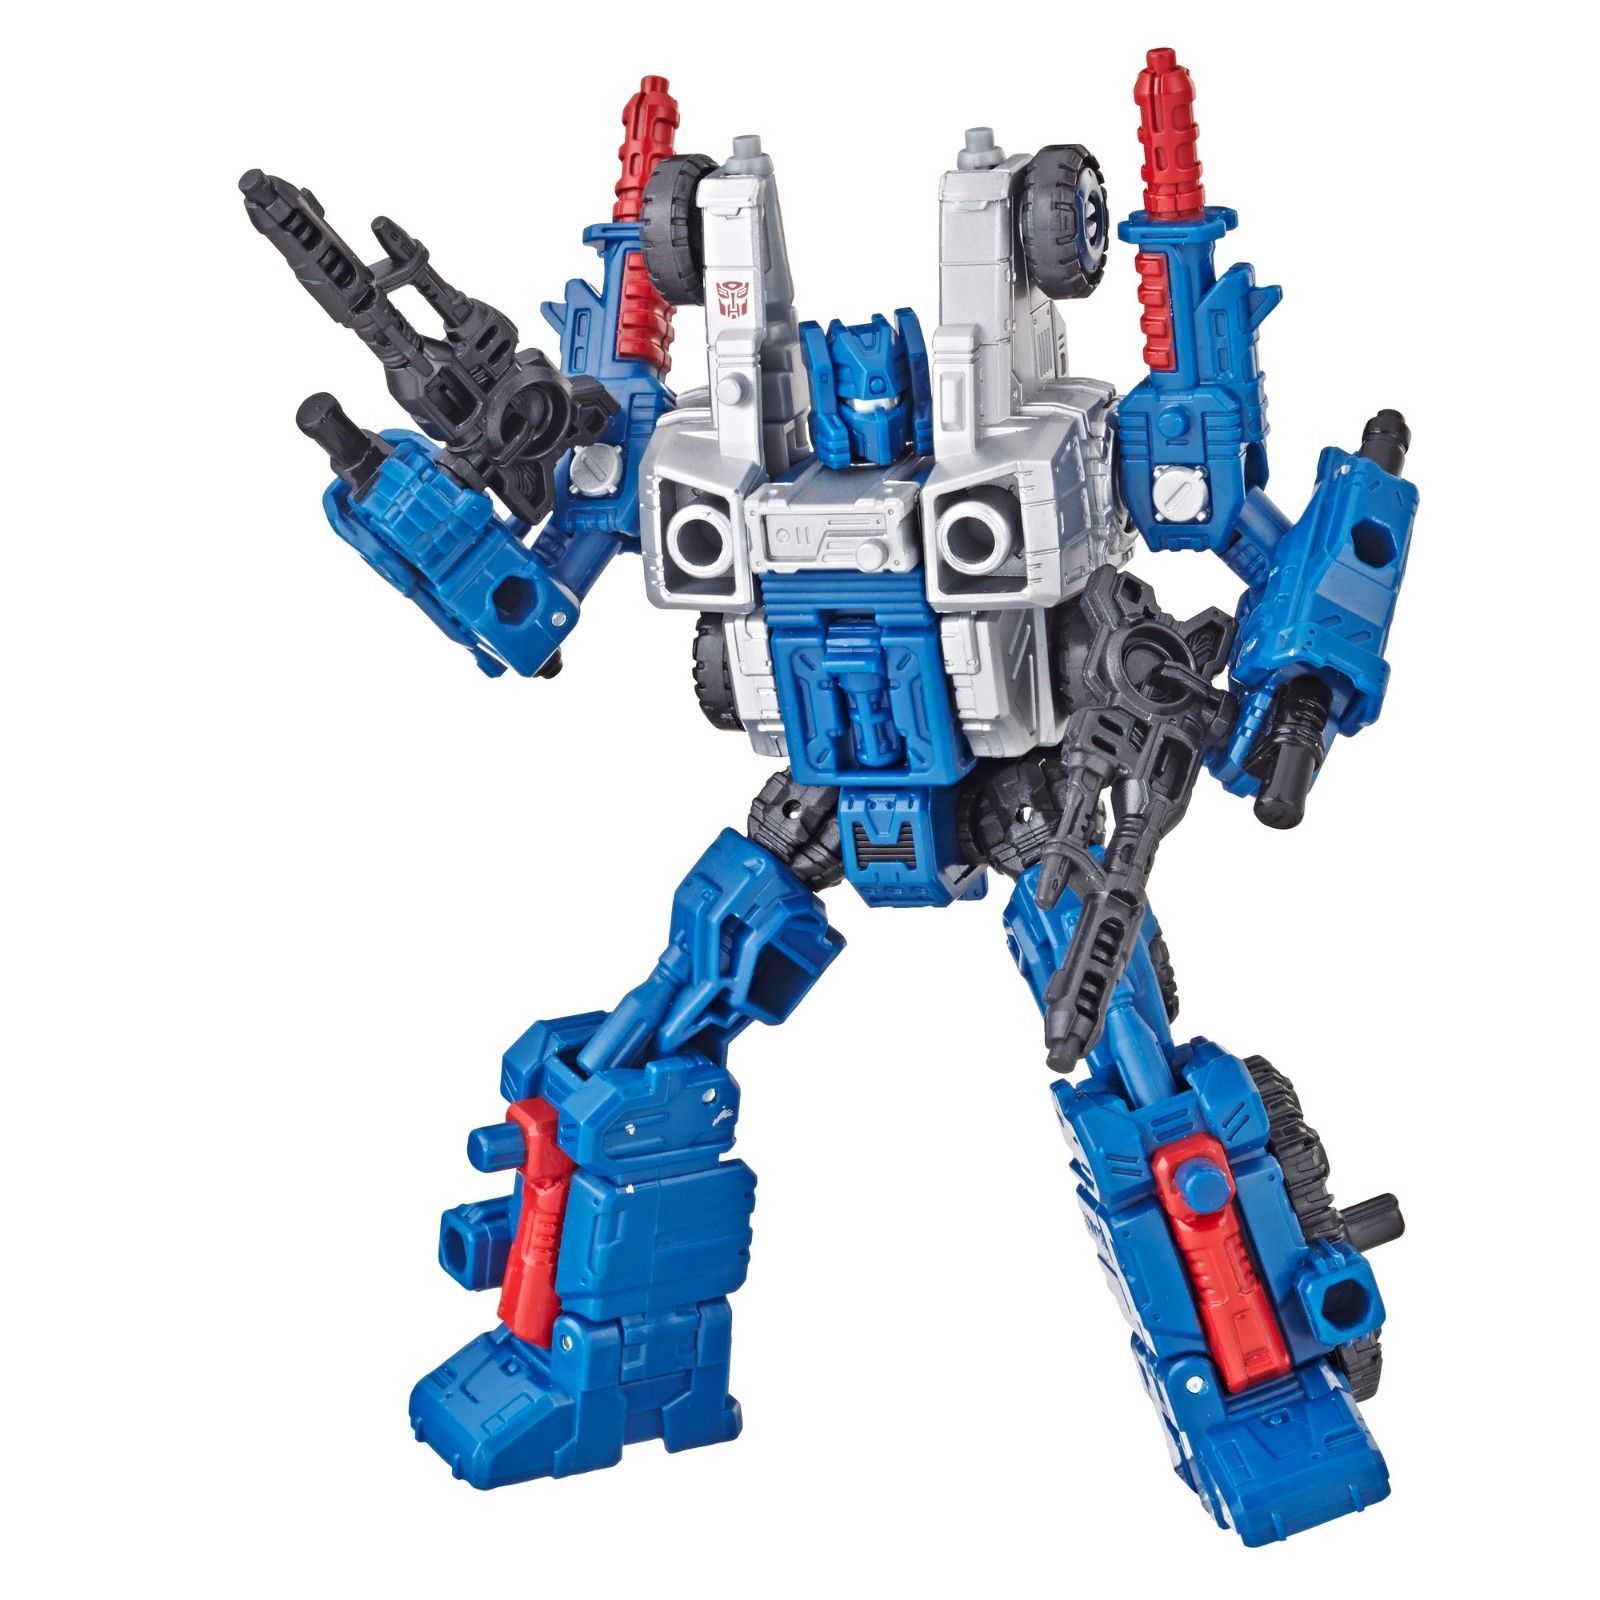 Transformers Generations War For Cybertron: Siege Deluxe Cog Action Figure WFC-S8